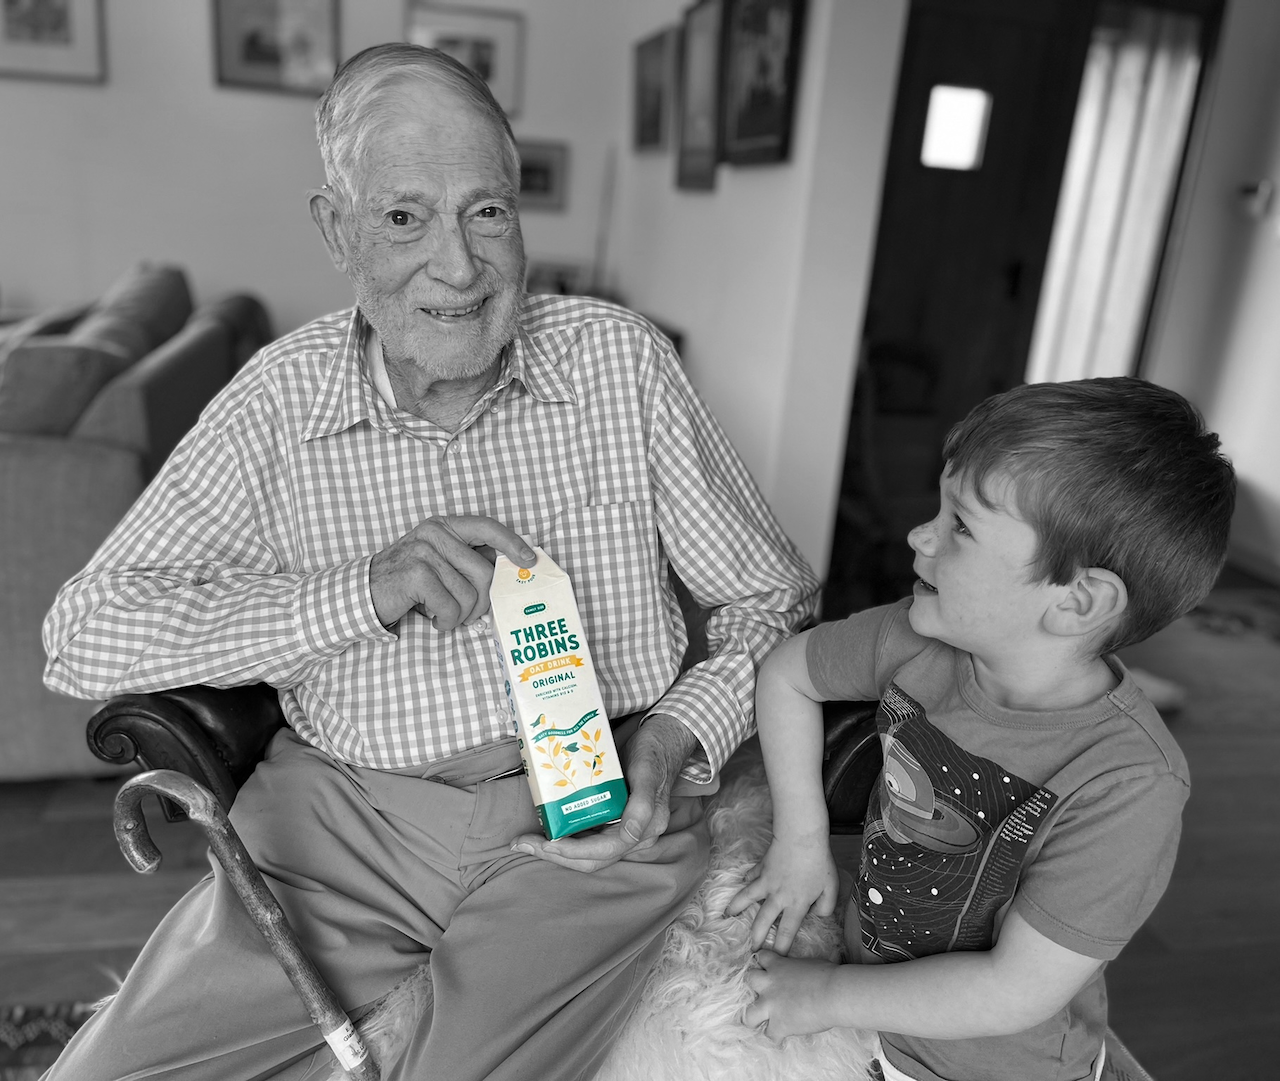 Great grandad holds carton of Three Robins Original Oat Drink while sitting with great grandson